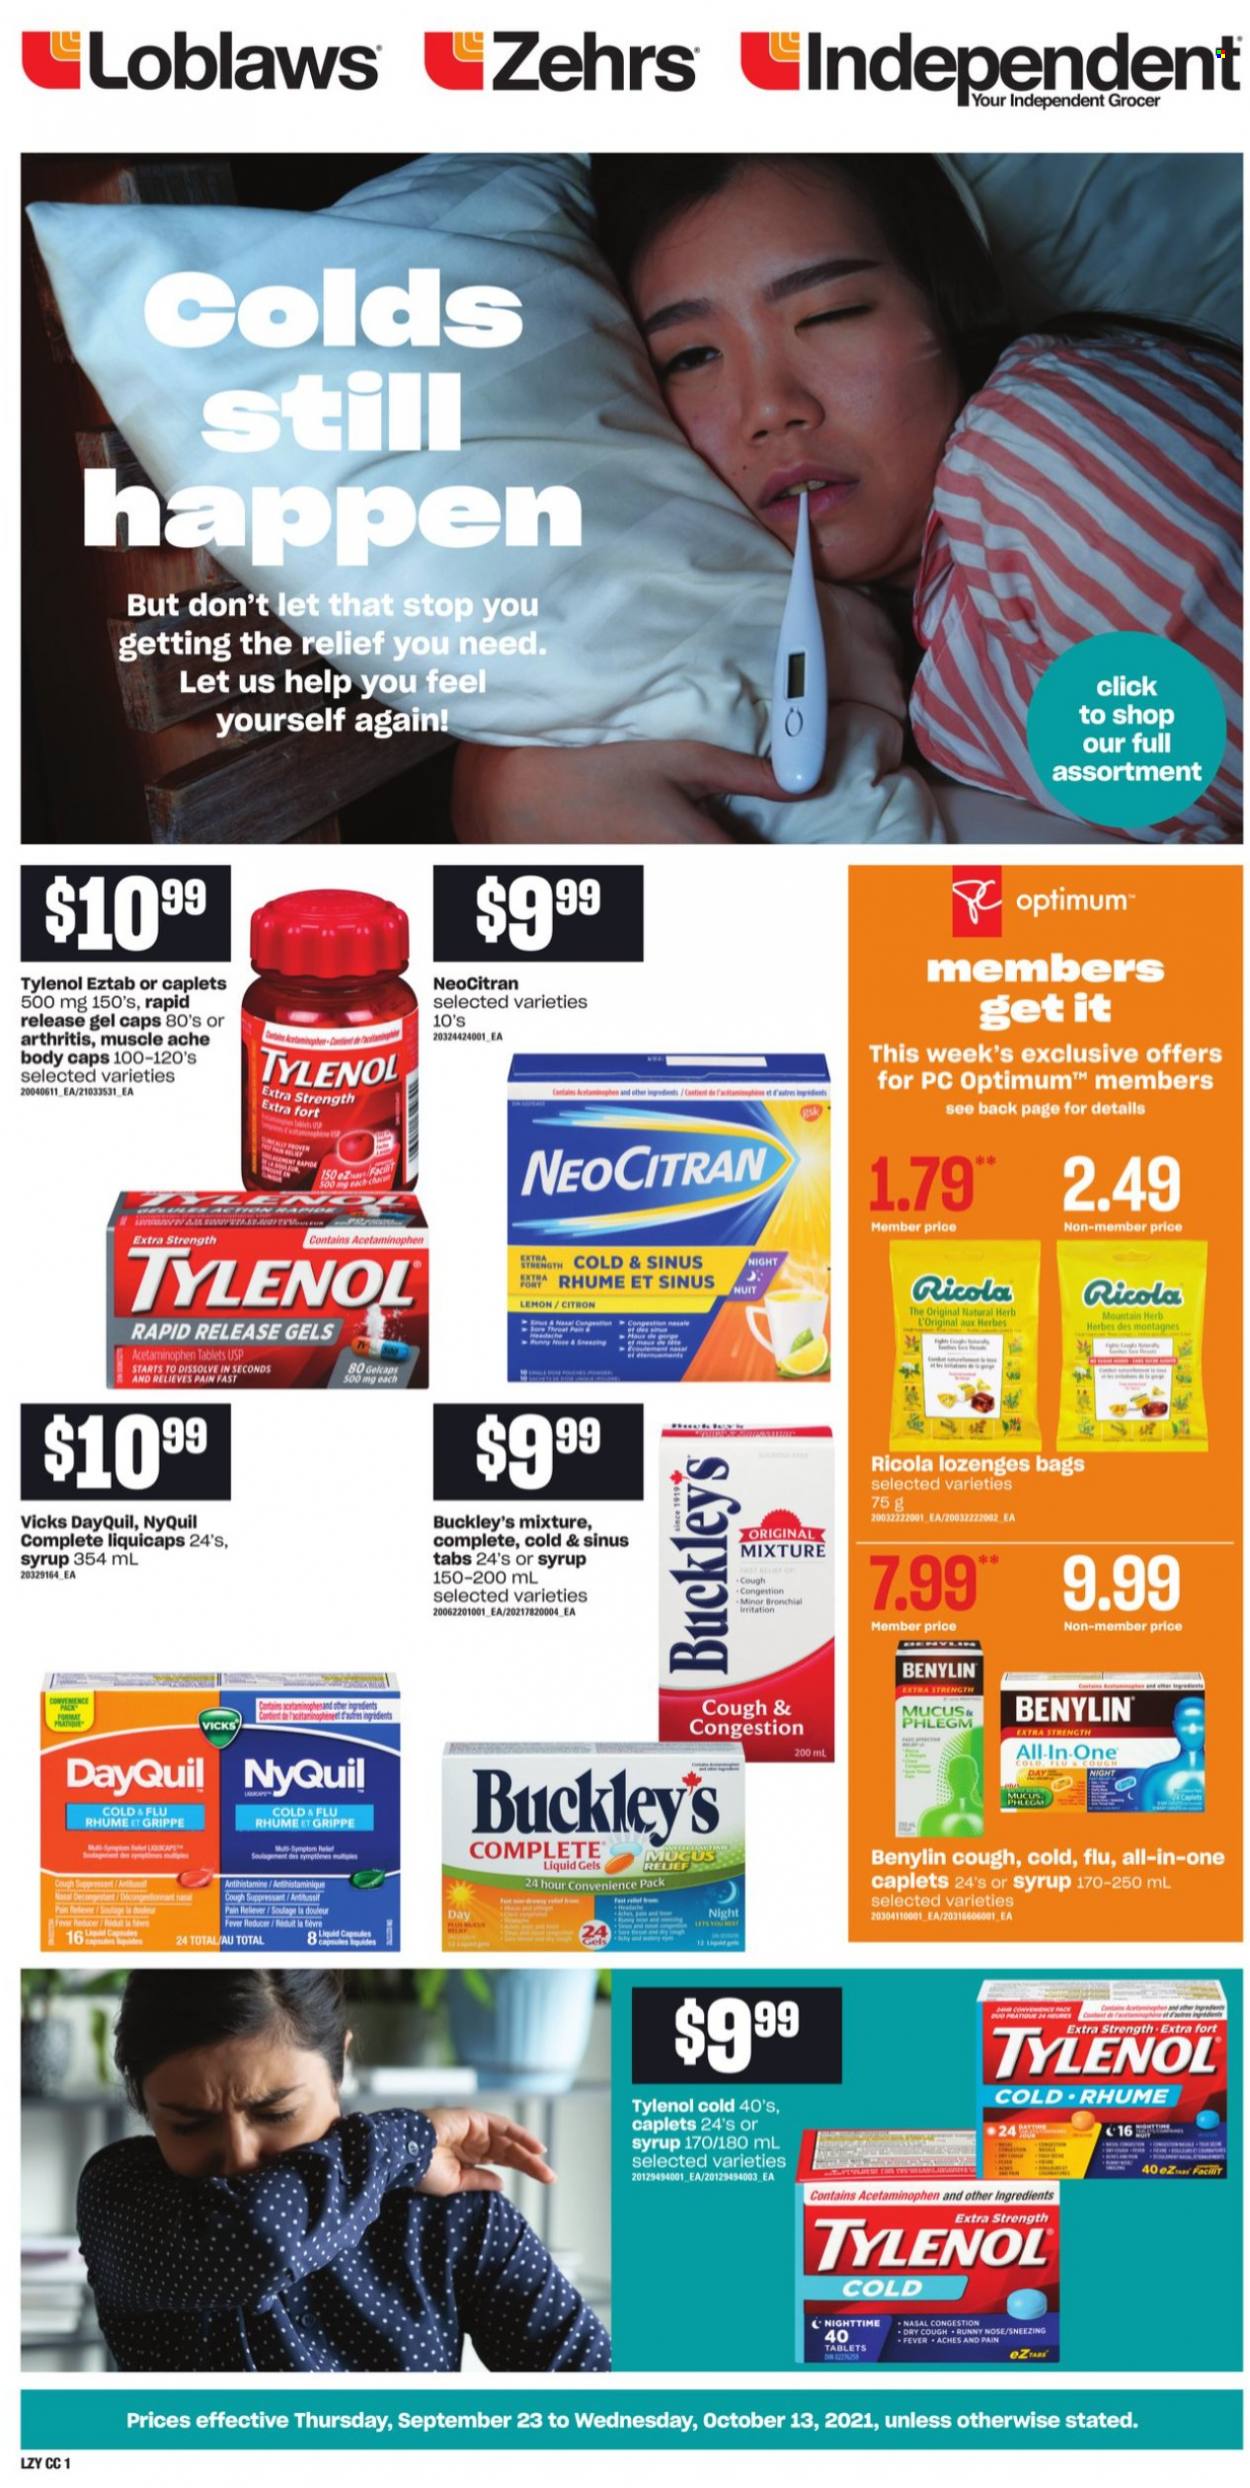 thumbnail - Loblaws Flyer - September 23, 2021 - October 13, 2021 - Sales products - Dole, Ricola, Vicks, bag, Optimum, DayQuil, Cold & Flu, Tylenol, NyQuil, Benylin. Page 1.